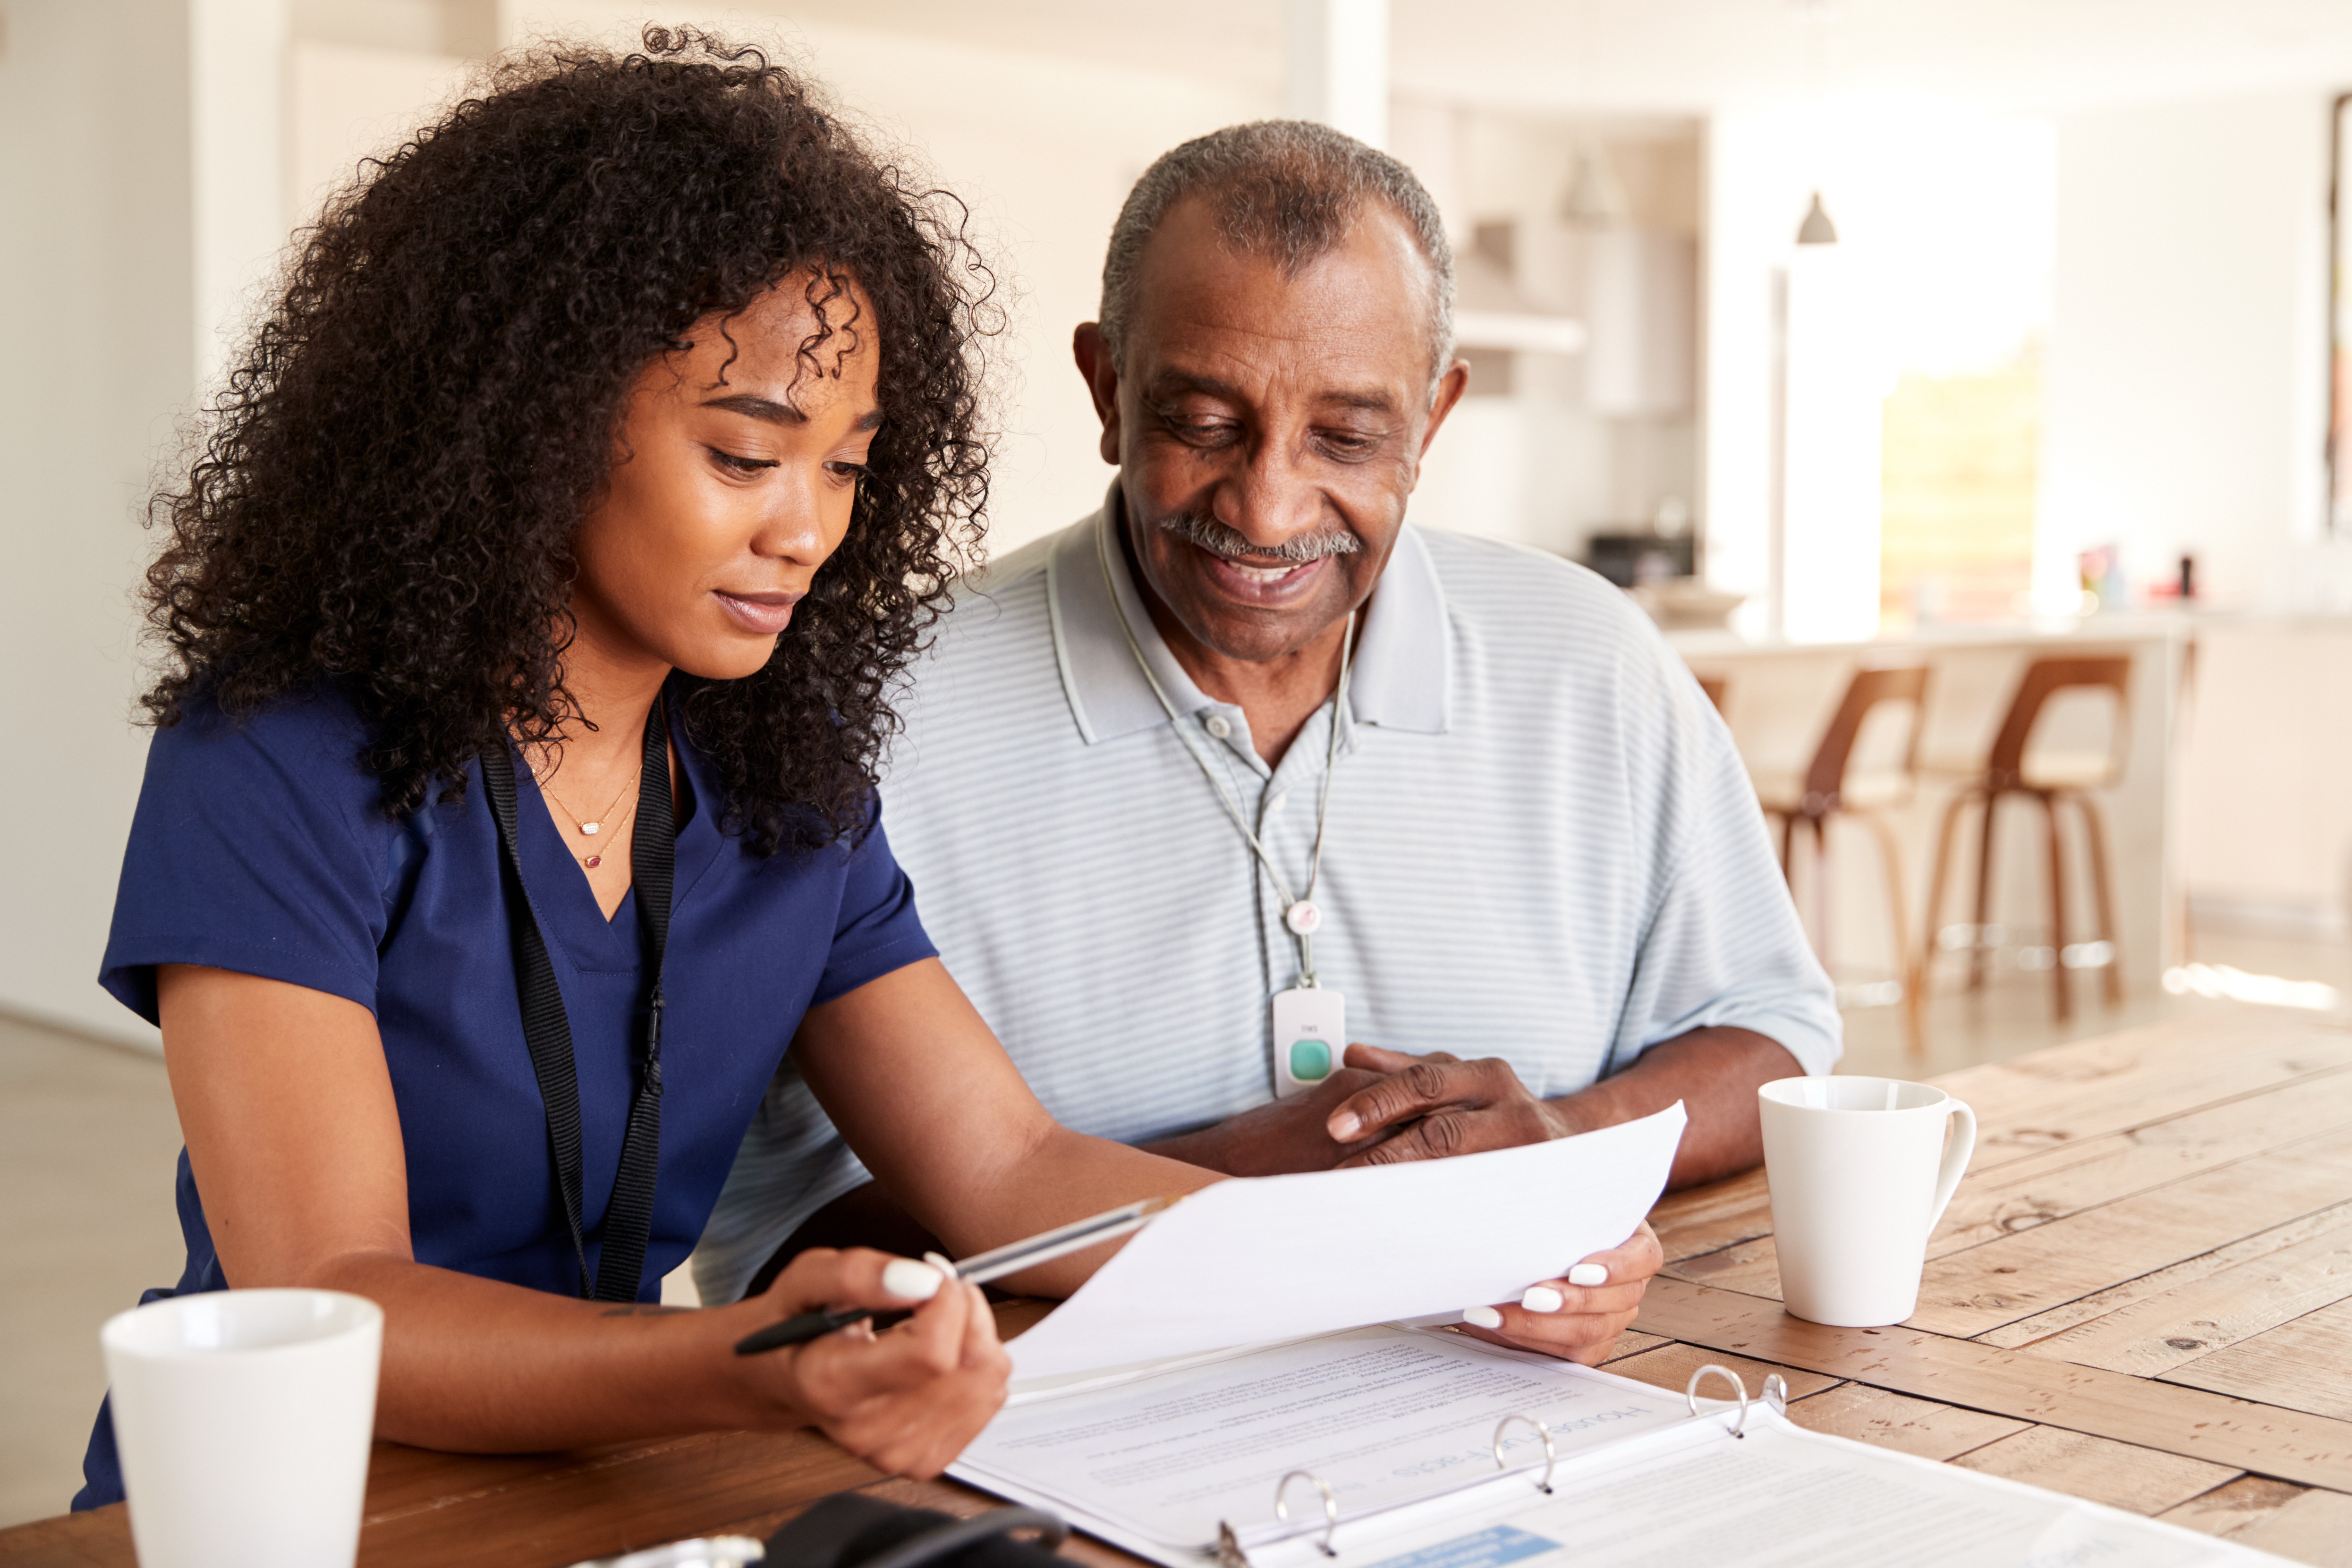 Female caregiver checking test results with a senior man during a home care visit.